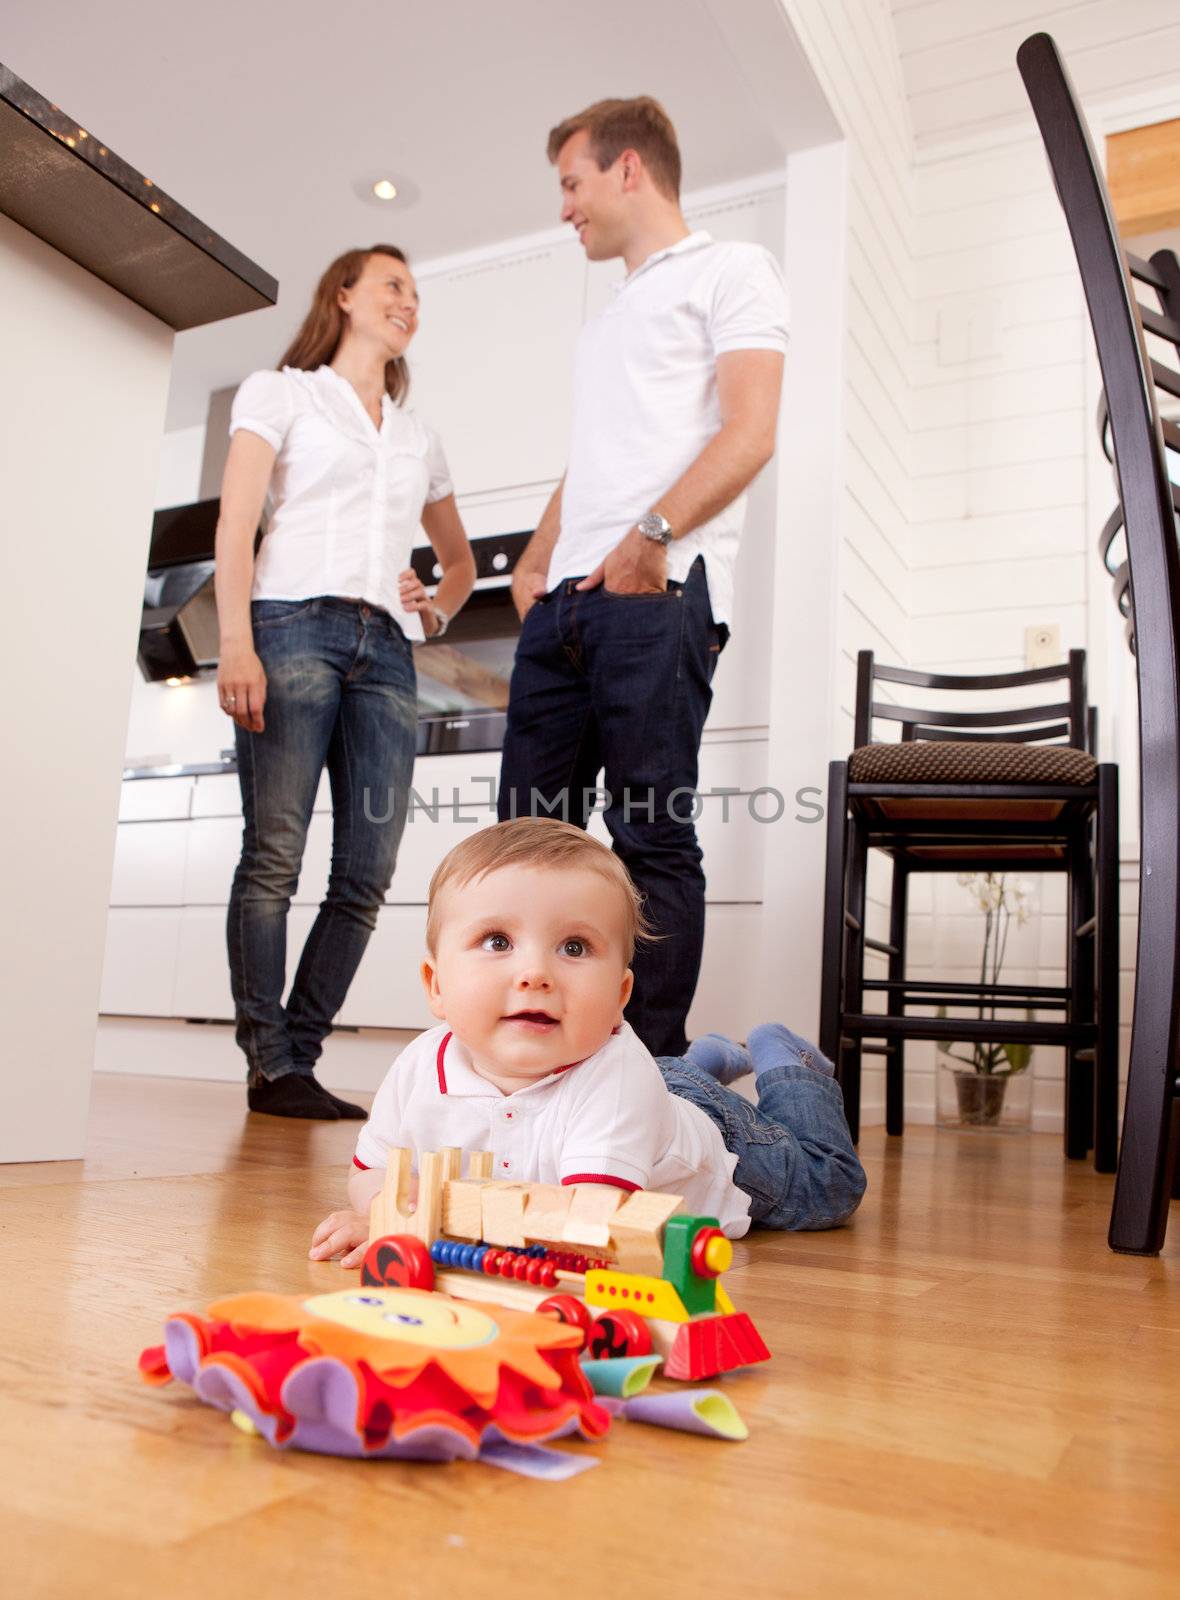 Baby Playing on Floor with Parents in Background by leaf